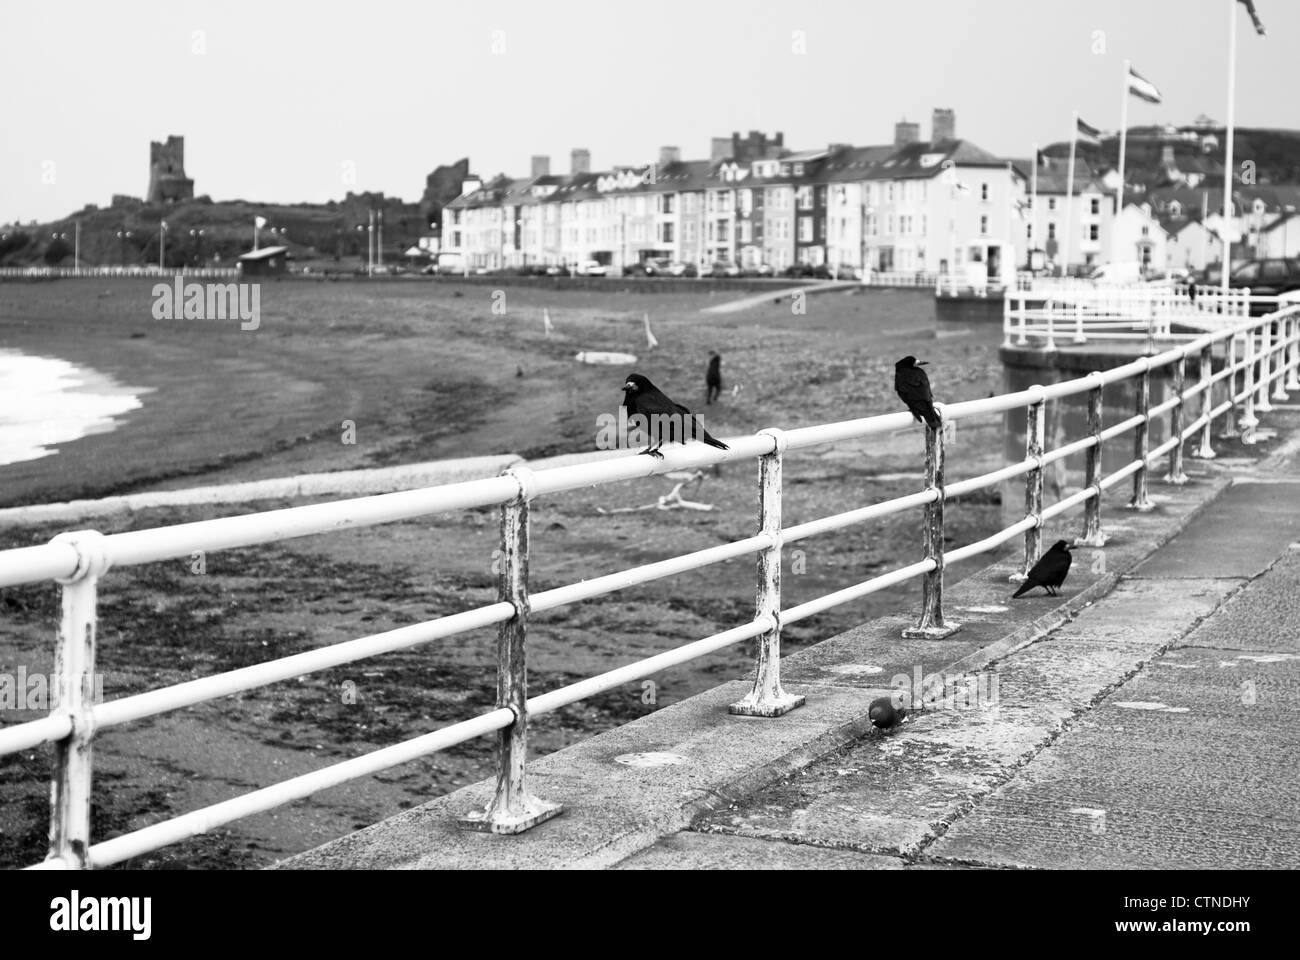 Ravens and Crows at the  seaside promenade. Stock Photo